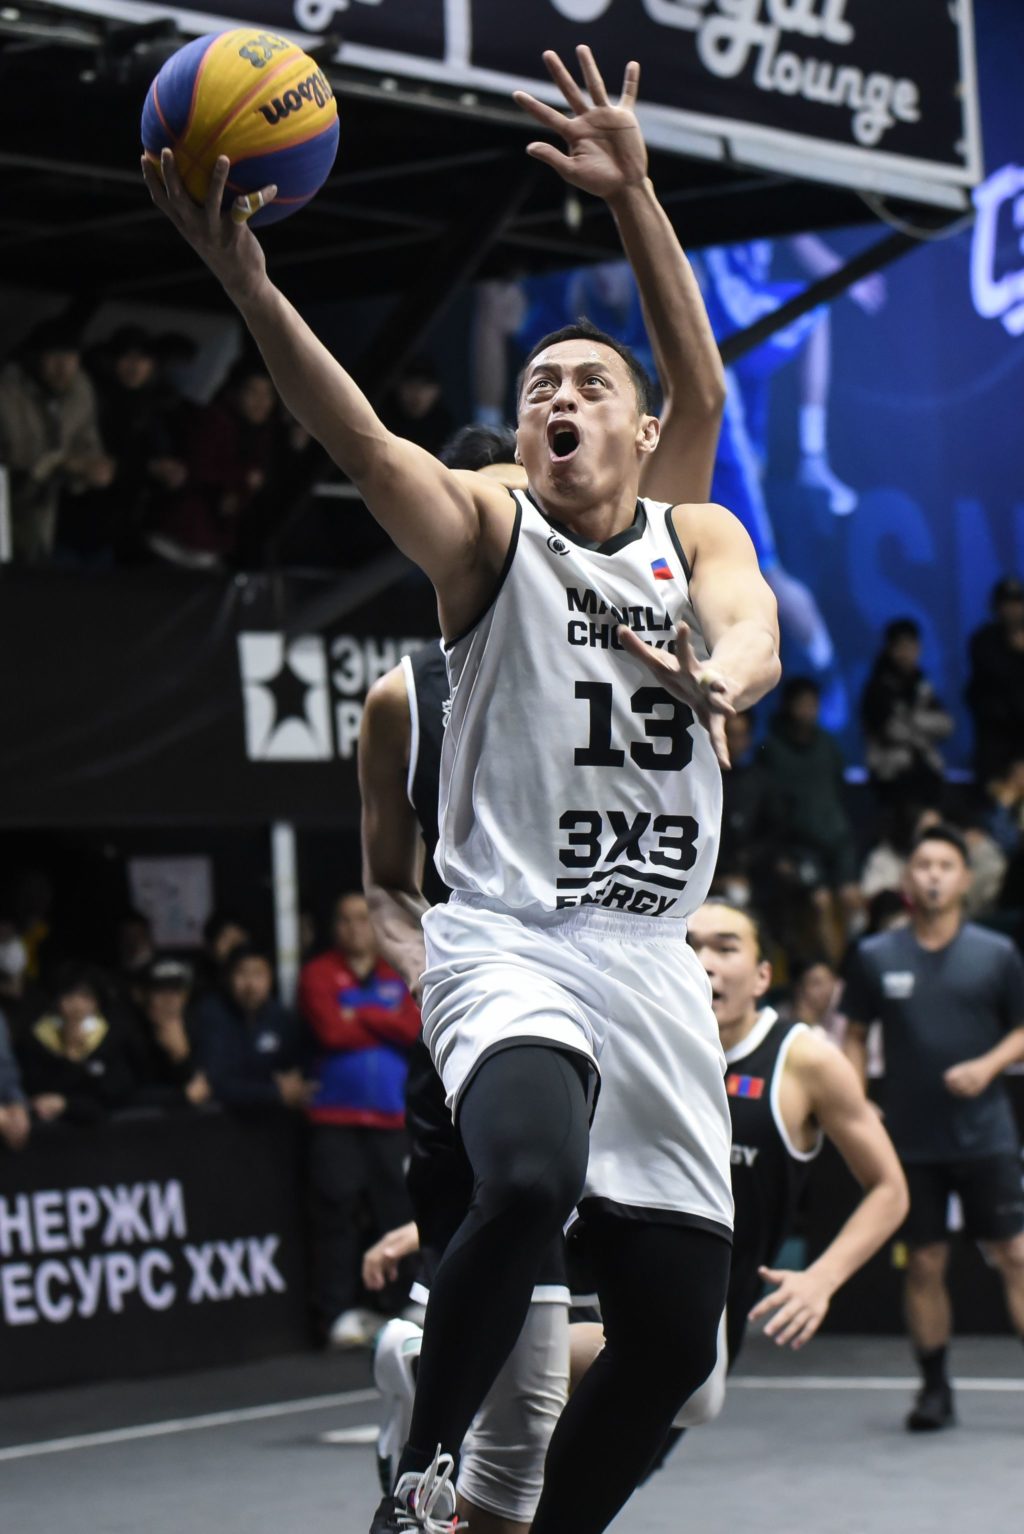 CEBU CHOOKS, MANILA CHOOKS BOW TO RESPECTIVE OPPONENTS. Veteran Filipino cager Chino Lanete goes for a layup during their campaign in the 2022 Ulaanbaatar FIBA 3x3 Super Quest in Mongolia. | Photo from Chooks Pilipinas Media Bureau